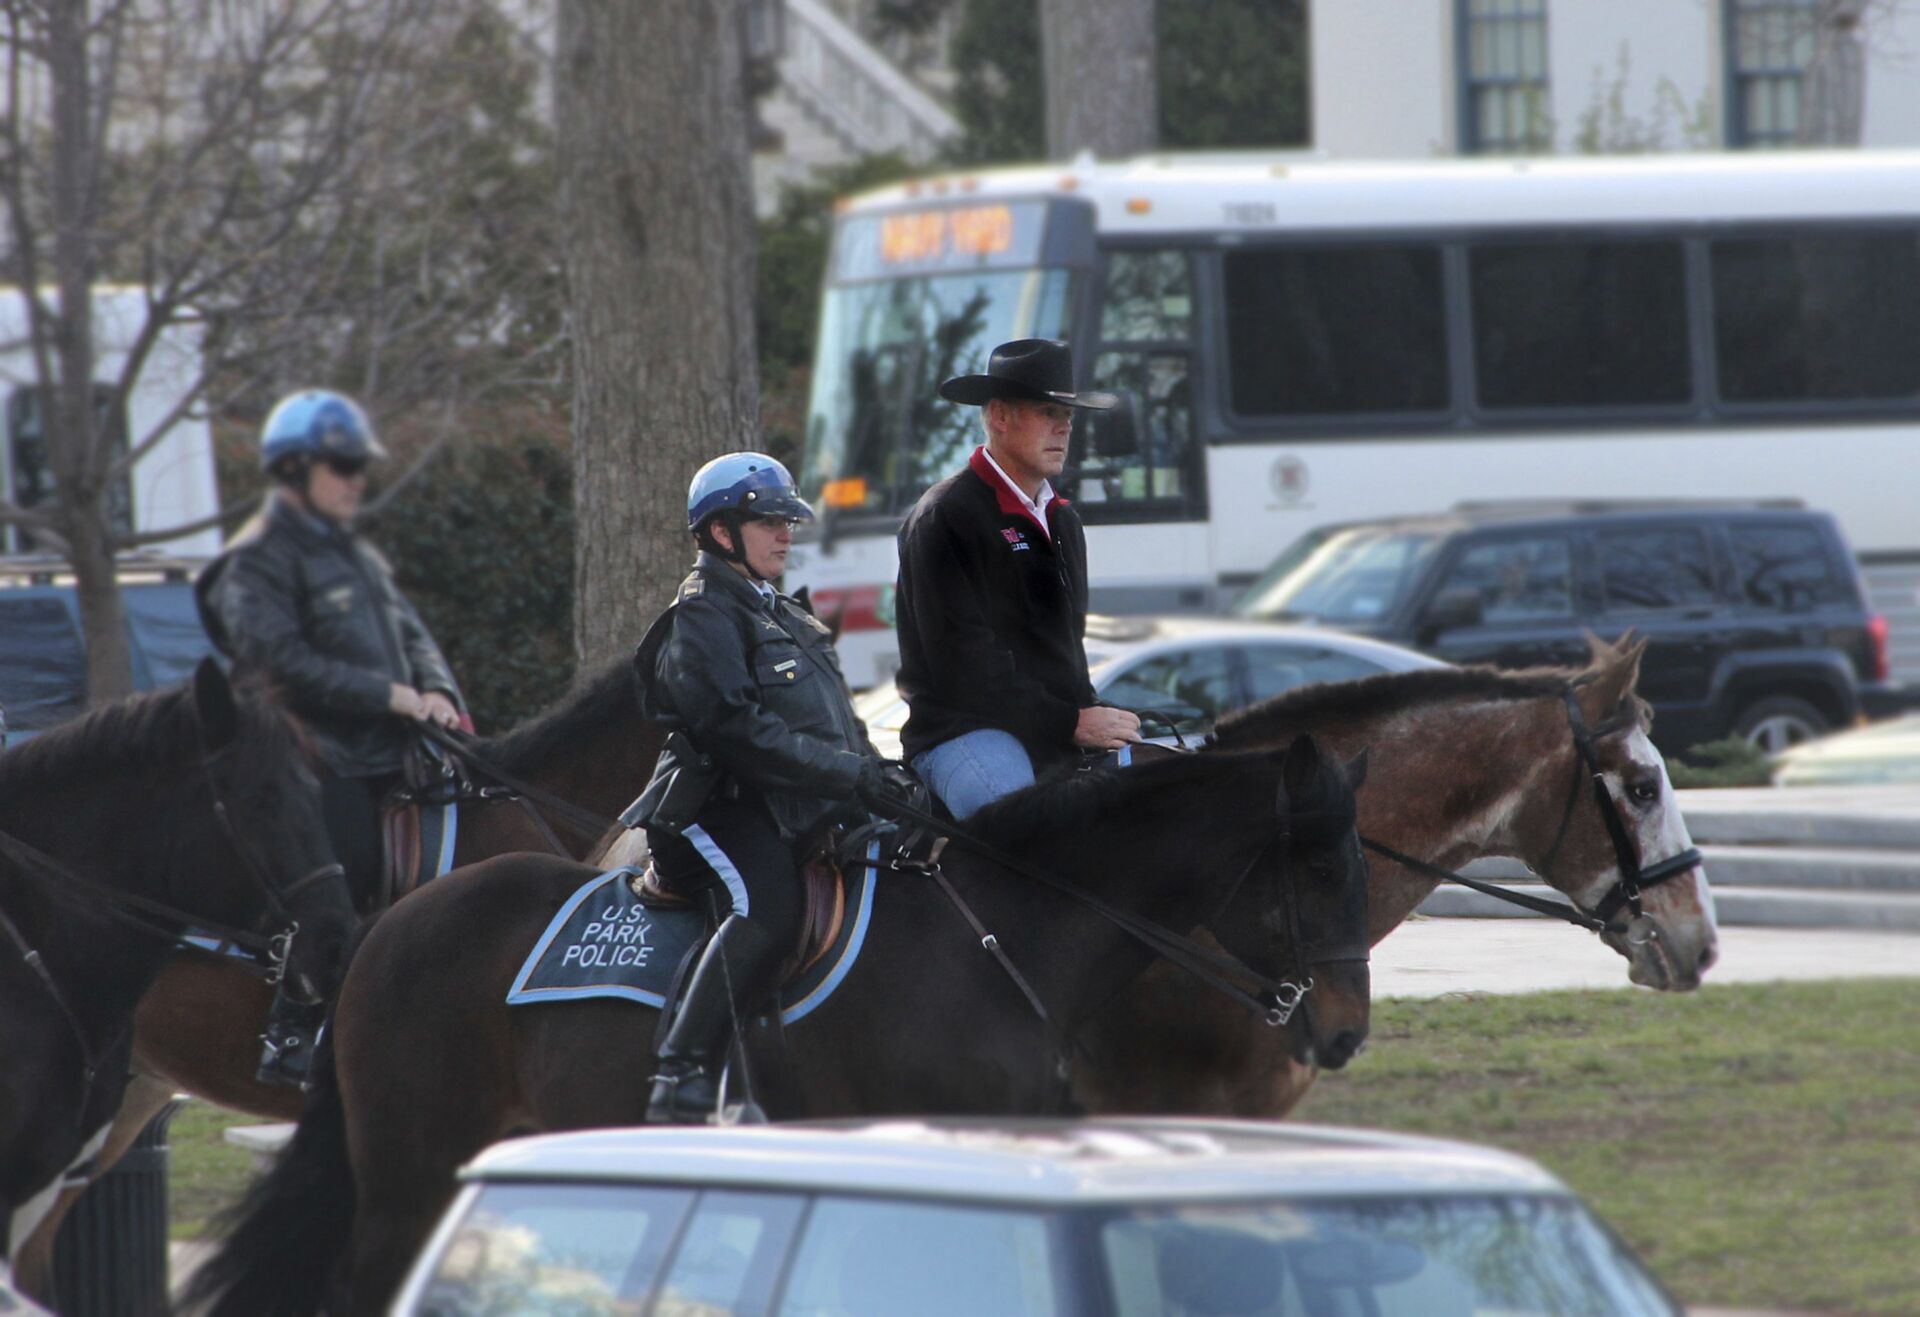 Interior Secretary Ryan Zinke arriving for his first day of work at the Interior Department in Washington, Thursday, March 2, 2017, aboard Tonto, an 17-year-old Irish sport horse - Sputnik International, 1920, 22.09.2022